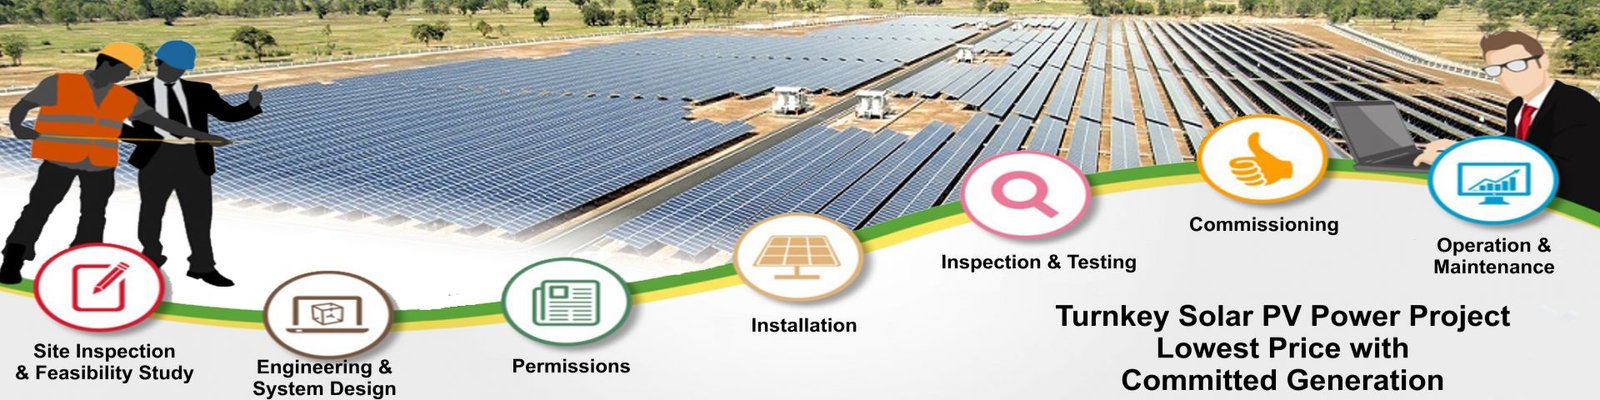 Turnkey Solar PV Project